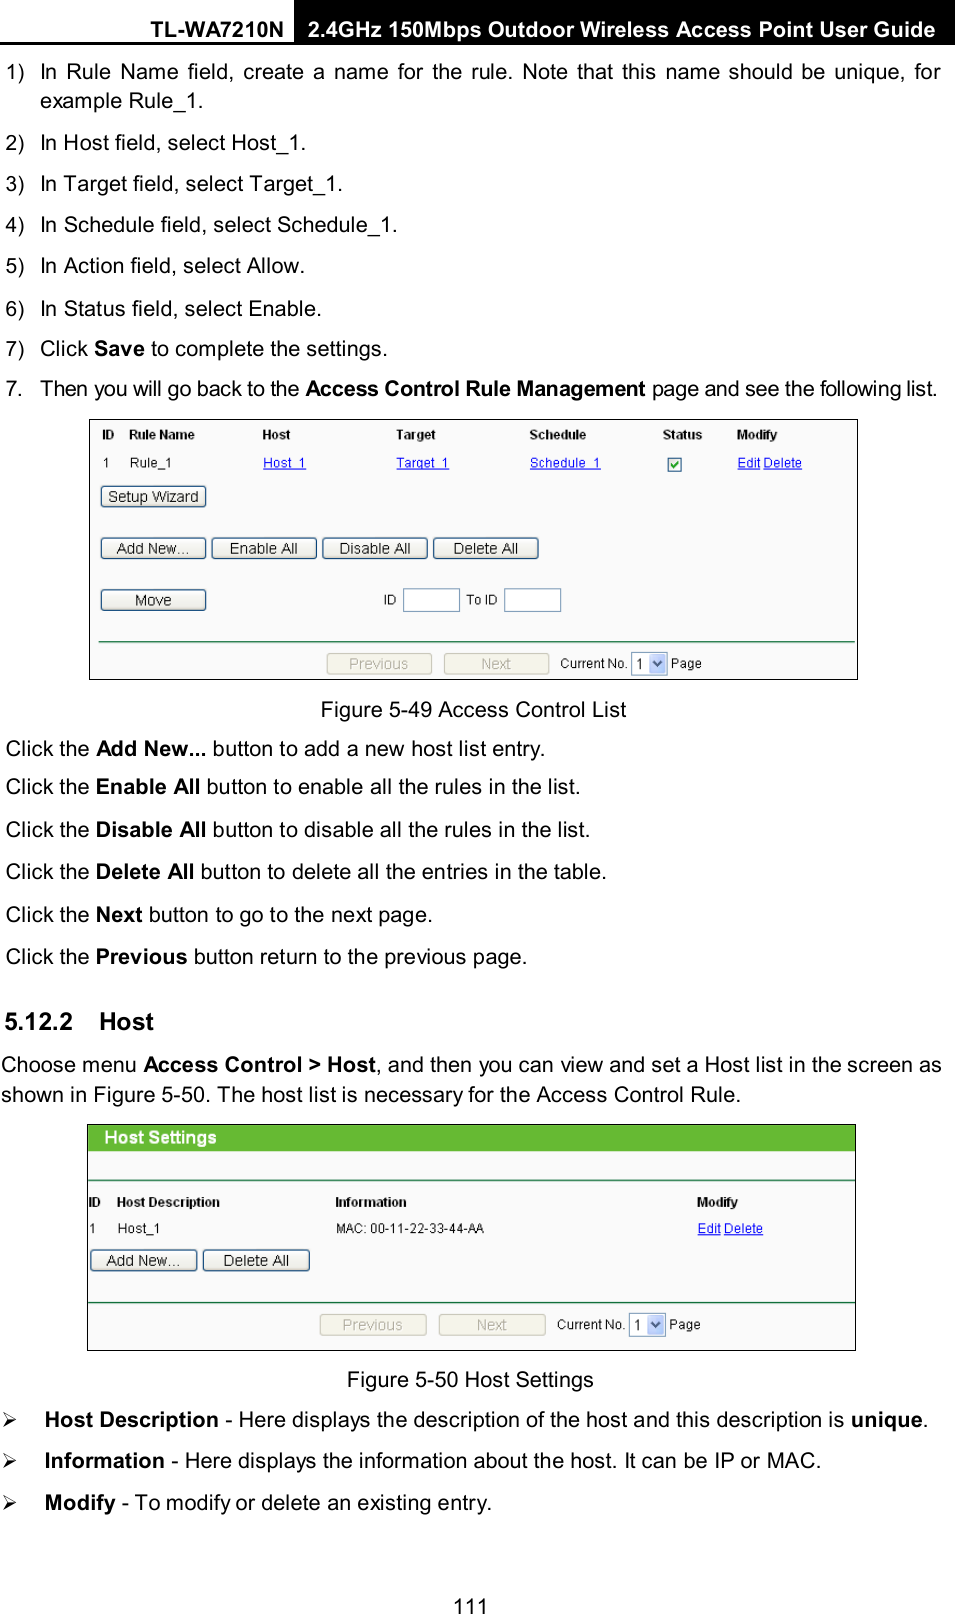 TL-WA7210N 2.4GHz 150Mbps Outdoor Wireless Access Point User Guide  1111) In Rule Name field, create a name for the rule. Note that this name should be unique, for example Rule_1.   2) In Host field, select Host_1.   3) In Target field, select Target_1.   4) In Schedule field, select Schedule_1.   5) In Action field, select Allow.   6) In Status field, select Enable.   7) Click Save to complete the settings. 7. Then you will go back to the Access Control Rule Management page and see the following list.  Figure 5-49 Access Control List Click the Add New... button to add a new host list entry. Click the Enable All button to enable all the rules in the list. Click the Disable All button to disable all the rules in the list. Click the Delete All button to delete all the entries in the table. Click the Next button to go to the next page. Click the Previous button return to the previous page. 5.12.2 Host Choose menu Access Control &gt; Host, and then you can view and set a Host list in the screen as shown in Figure 5-50. The host list is necessary for the Access Control Rule.  Figure 5-50 Host Settings  Host Description - Here displays the description of the host and this description is unique.    Information - Here displays the information about the host. It can be IP or MAC.    Modify - To modify or delete an existing entry.   